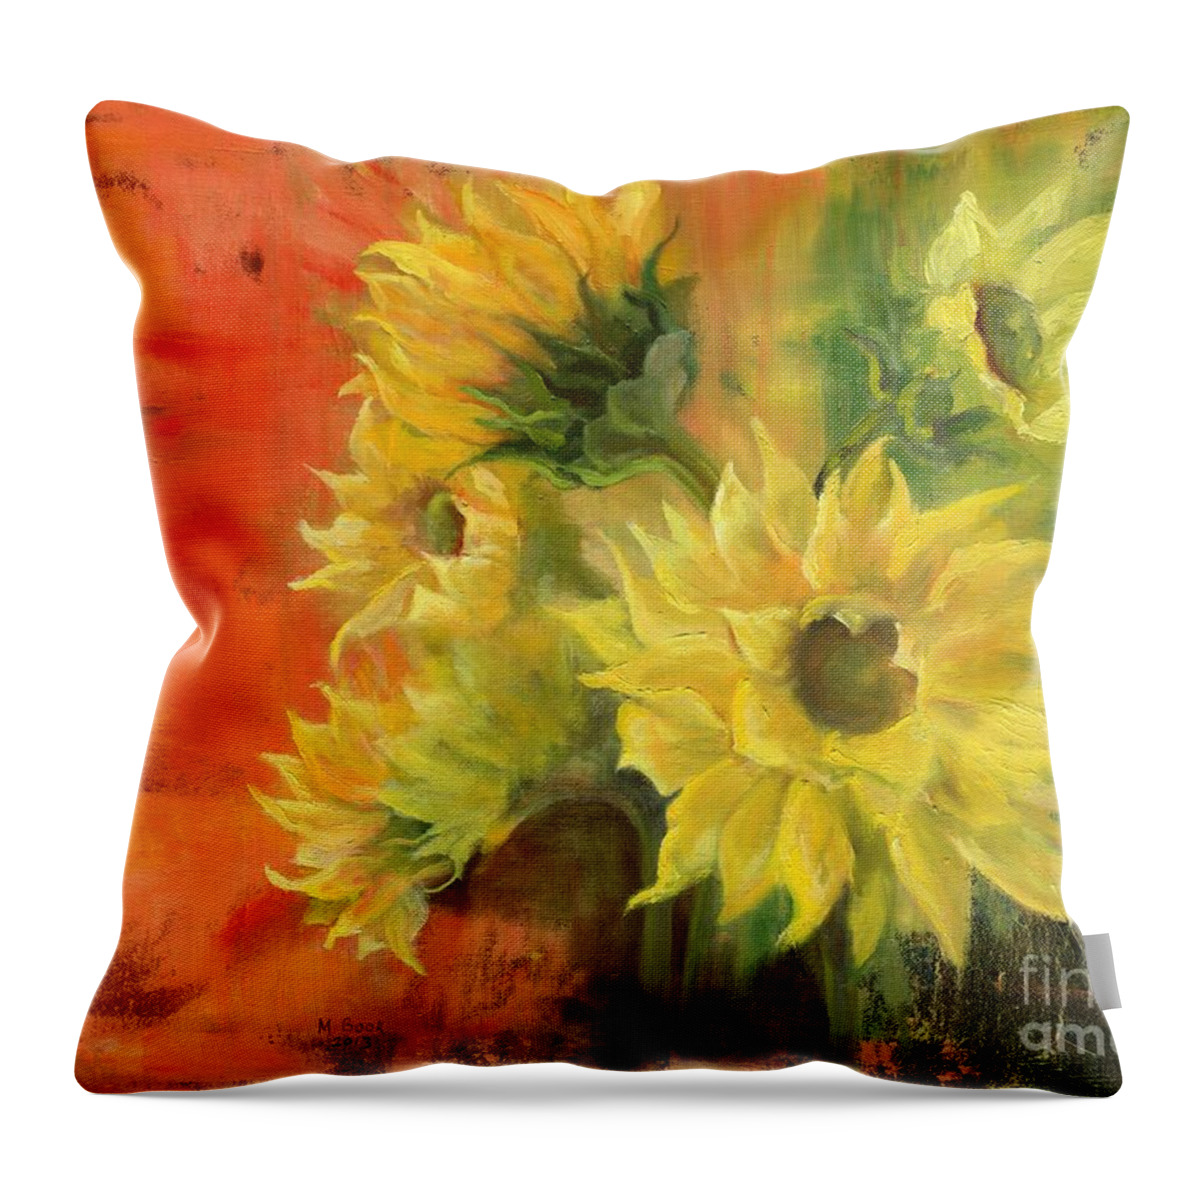 Sunflowers Throw Pillow featuring the painting Sunny by Marlene Book